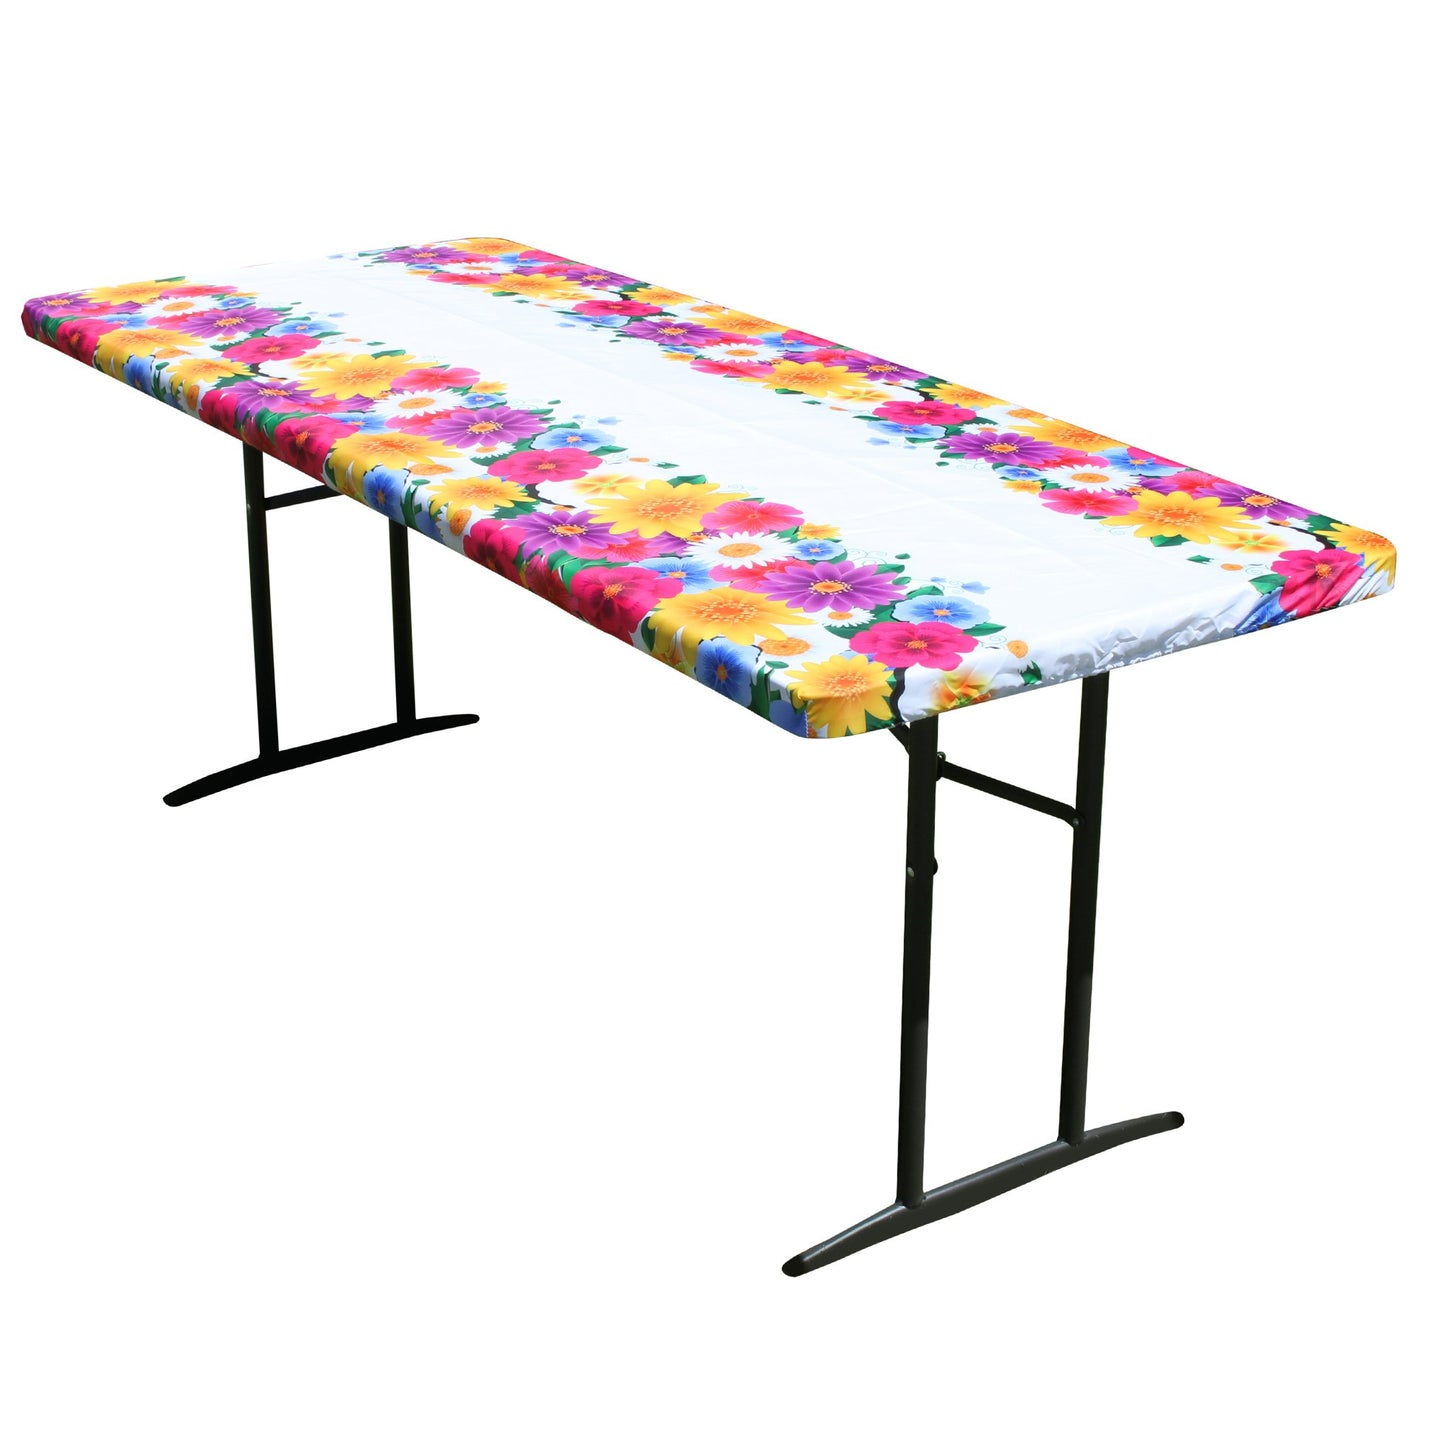 TableCloth PLUS 72" Spring Fitted Polyester Tablecloth for 6' Folding Tables displayed adorning a folding table